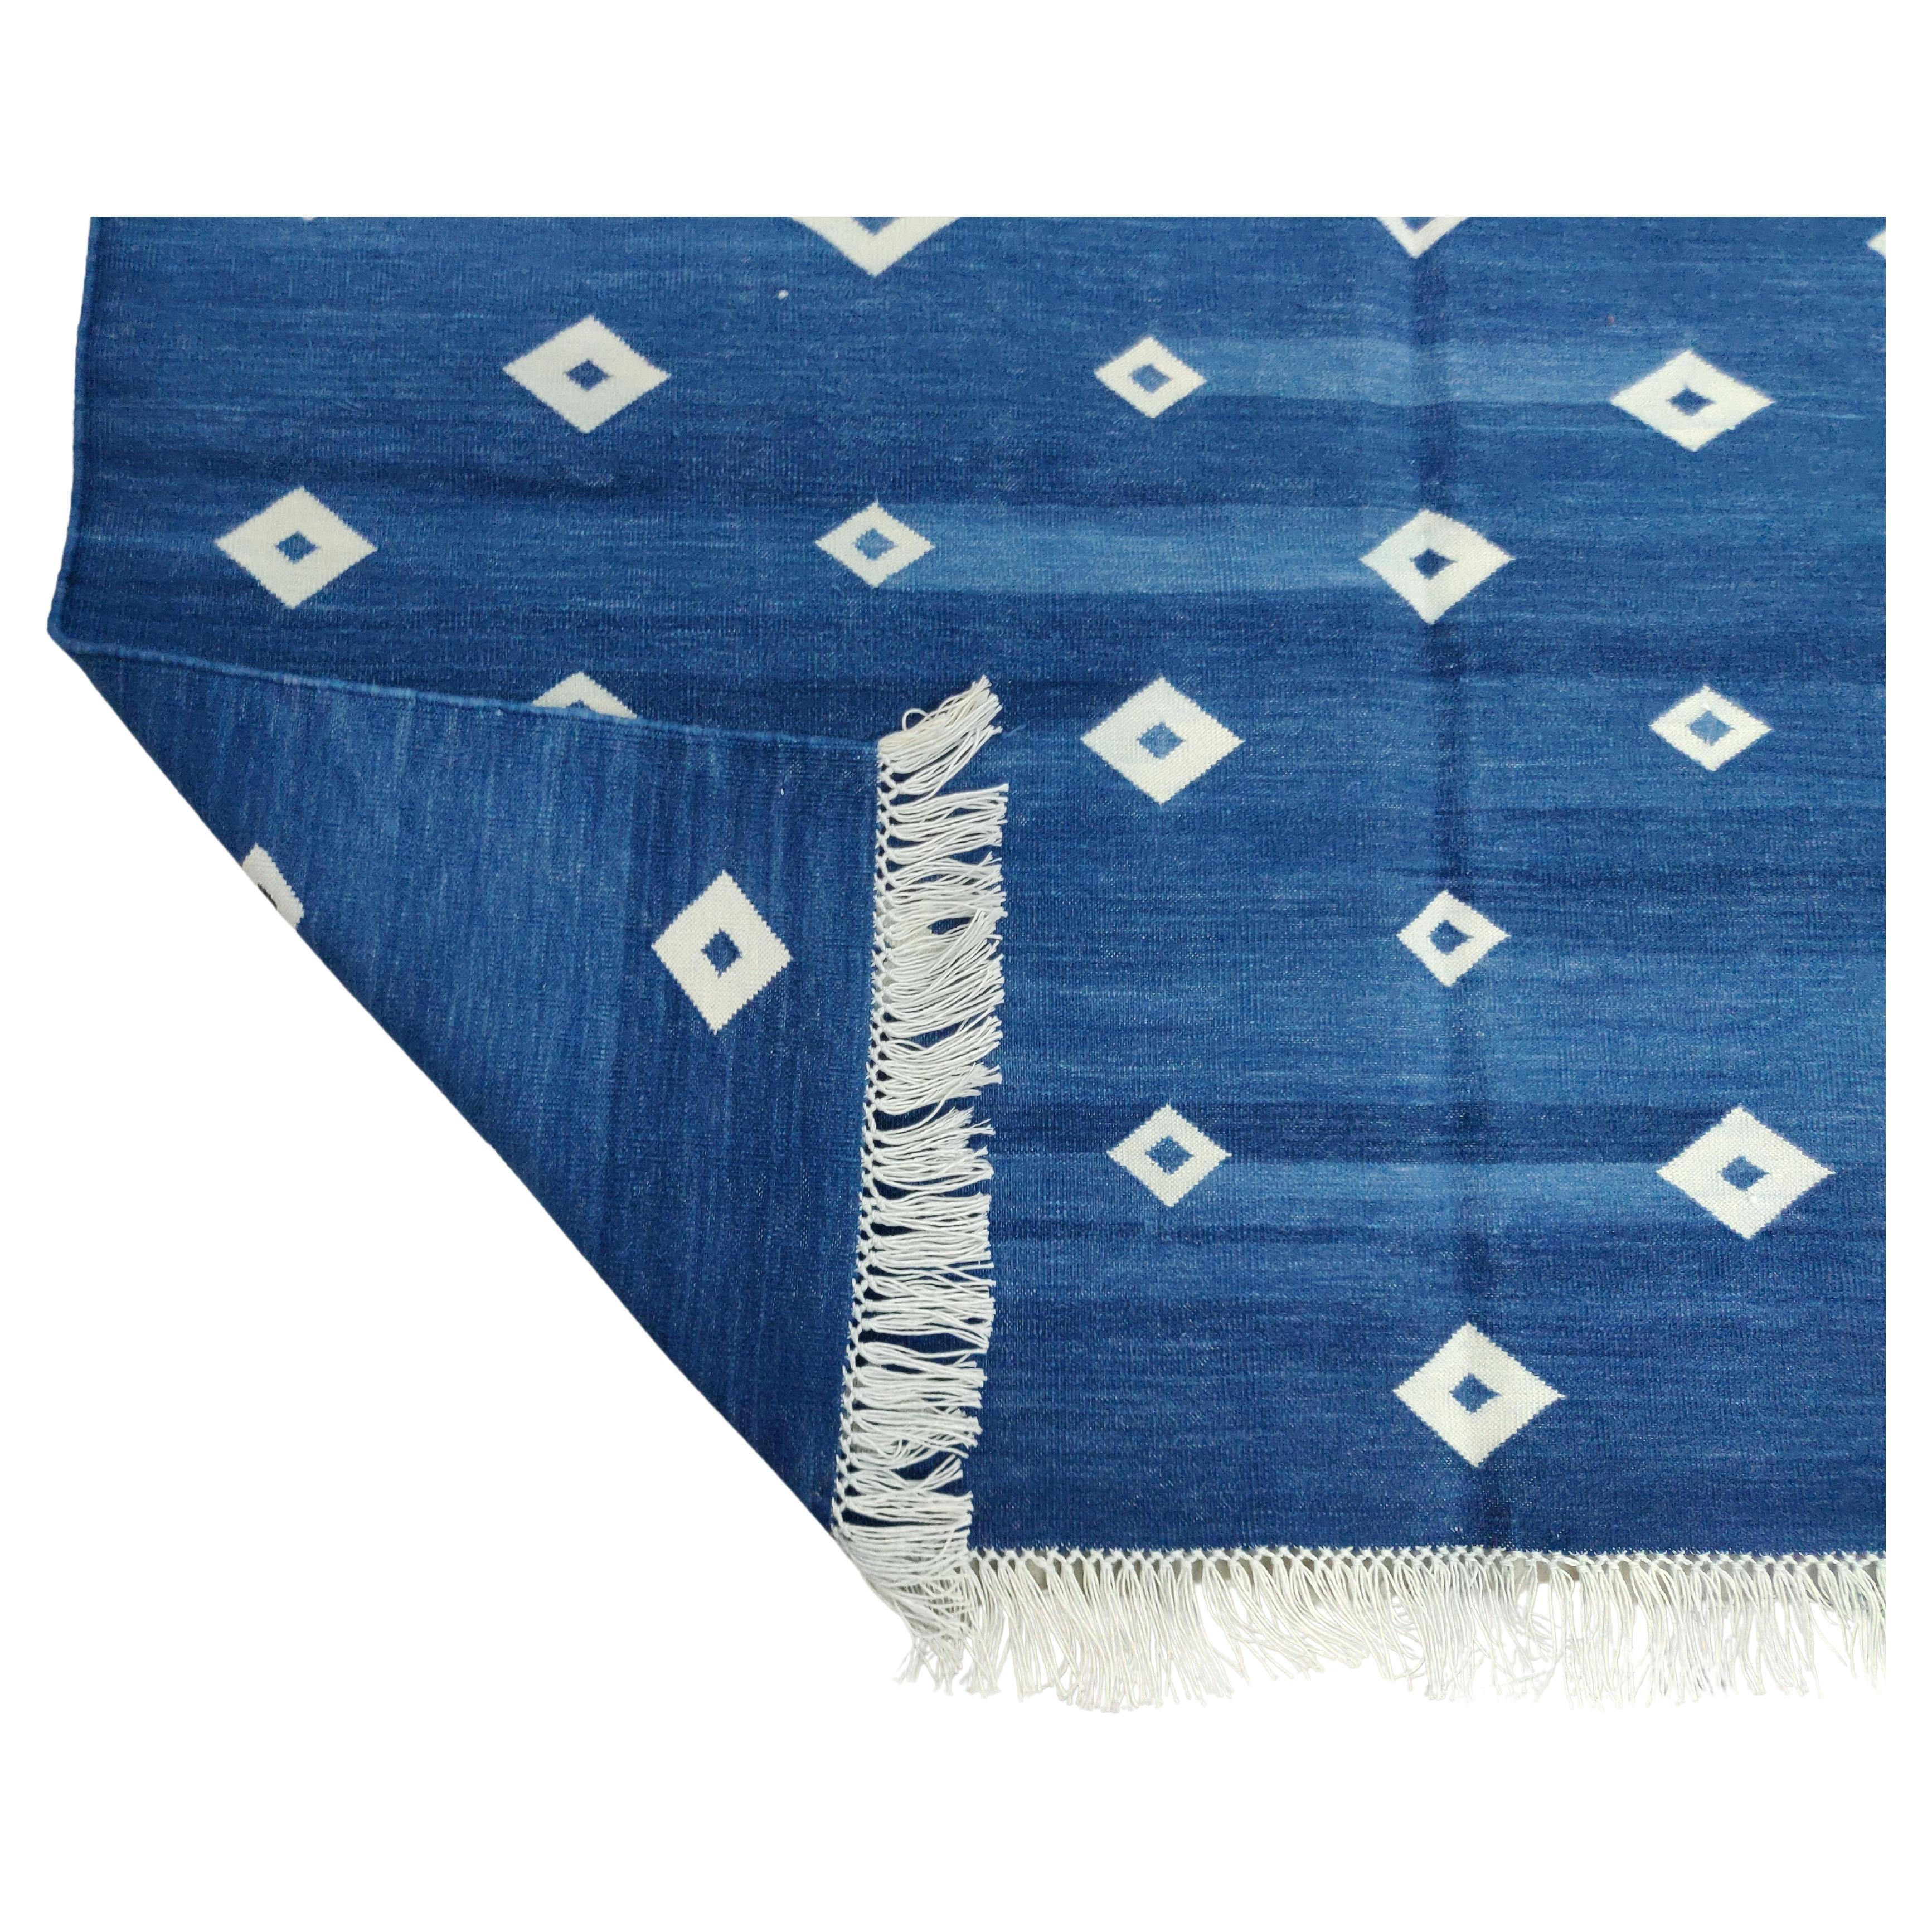 Cotton Vegetable Dyed Indigo Blue and White Diamond Indian Dhurrie Rug-4'x6' 

These special flat-weave dhurries are hand-woven with 15 ply 100% cotton yarn. Due to the special manufacturing techniques used to create our rugs, the size and color of